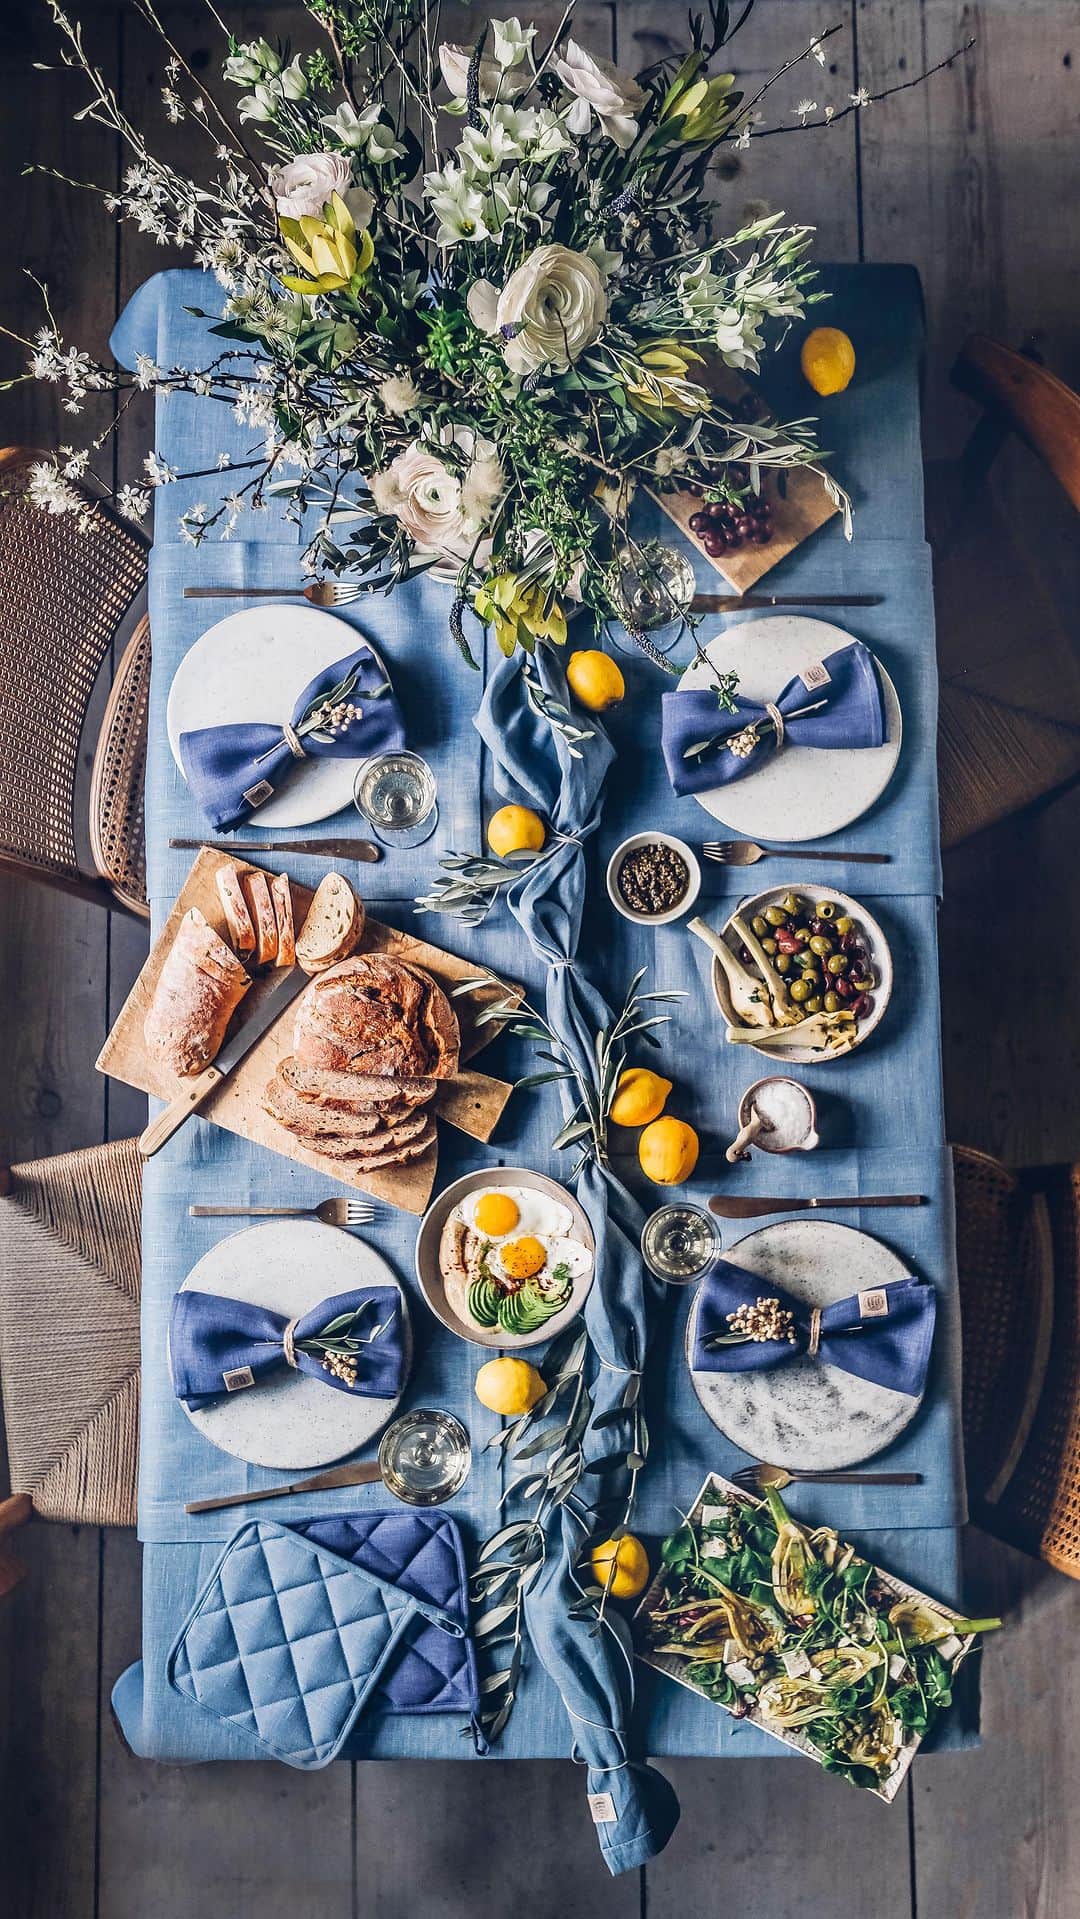 Our Food Storiesのインスタグラム：「It’s finally time for all these lovely spring gatherings again💙 We will share this delicious salad recipe with roasted fennel, feta cheese and capers with you guys on the blog soon. Happy Monday! #ourfoodstories  ____ #gatheringslikethese #lovelylinen #linenlove #tablelinen #tablecloth #bluelinen #springgathering #gathering #tablesetting #tablesettings #tablescapes #tabledecoration #foodstyling #foodstylist #foodphotographer #dreamyaesthetic #onthetable #momentslikethese #simplejoys #tischdekoration #tischdeko #foodreel」